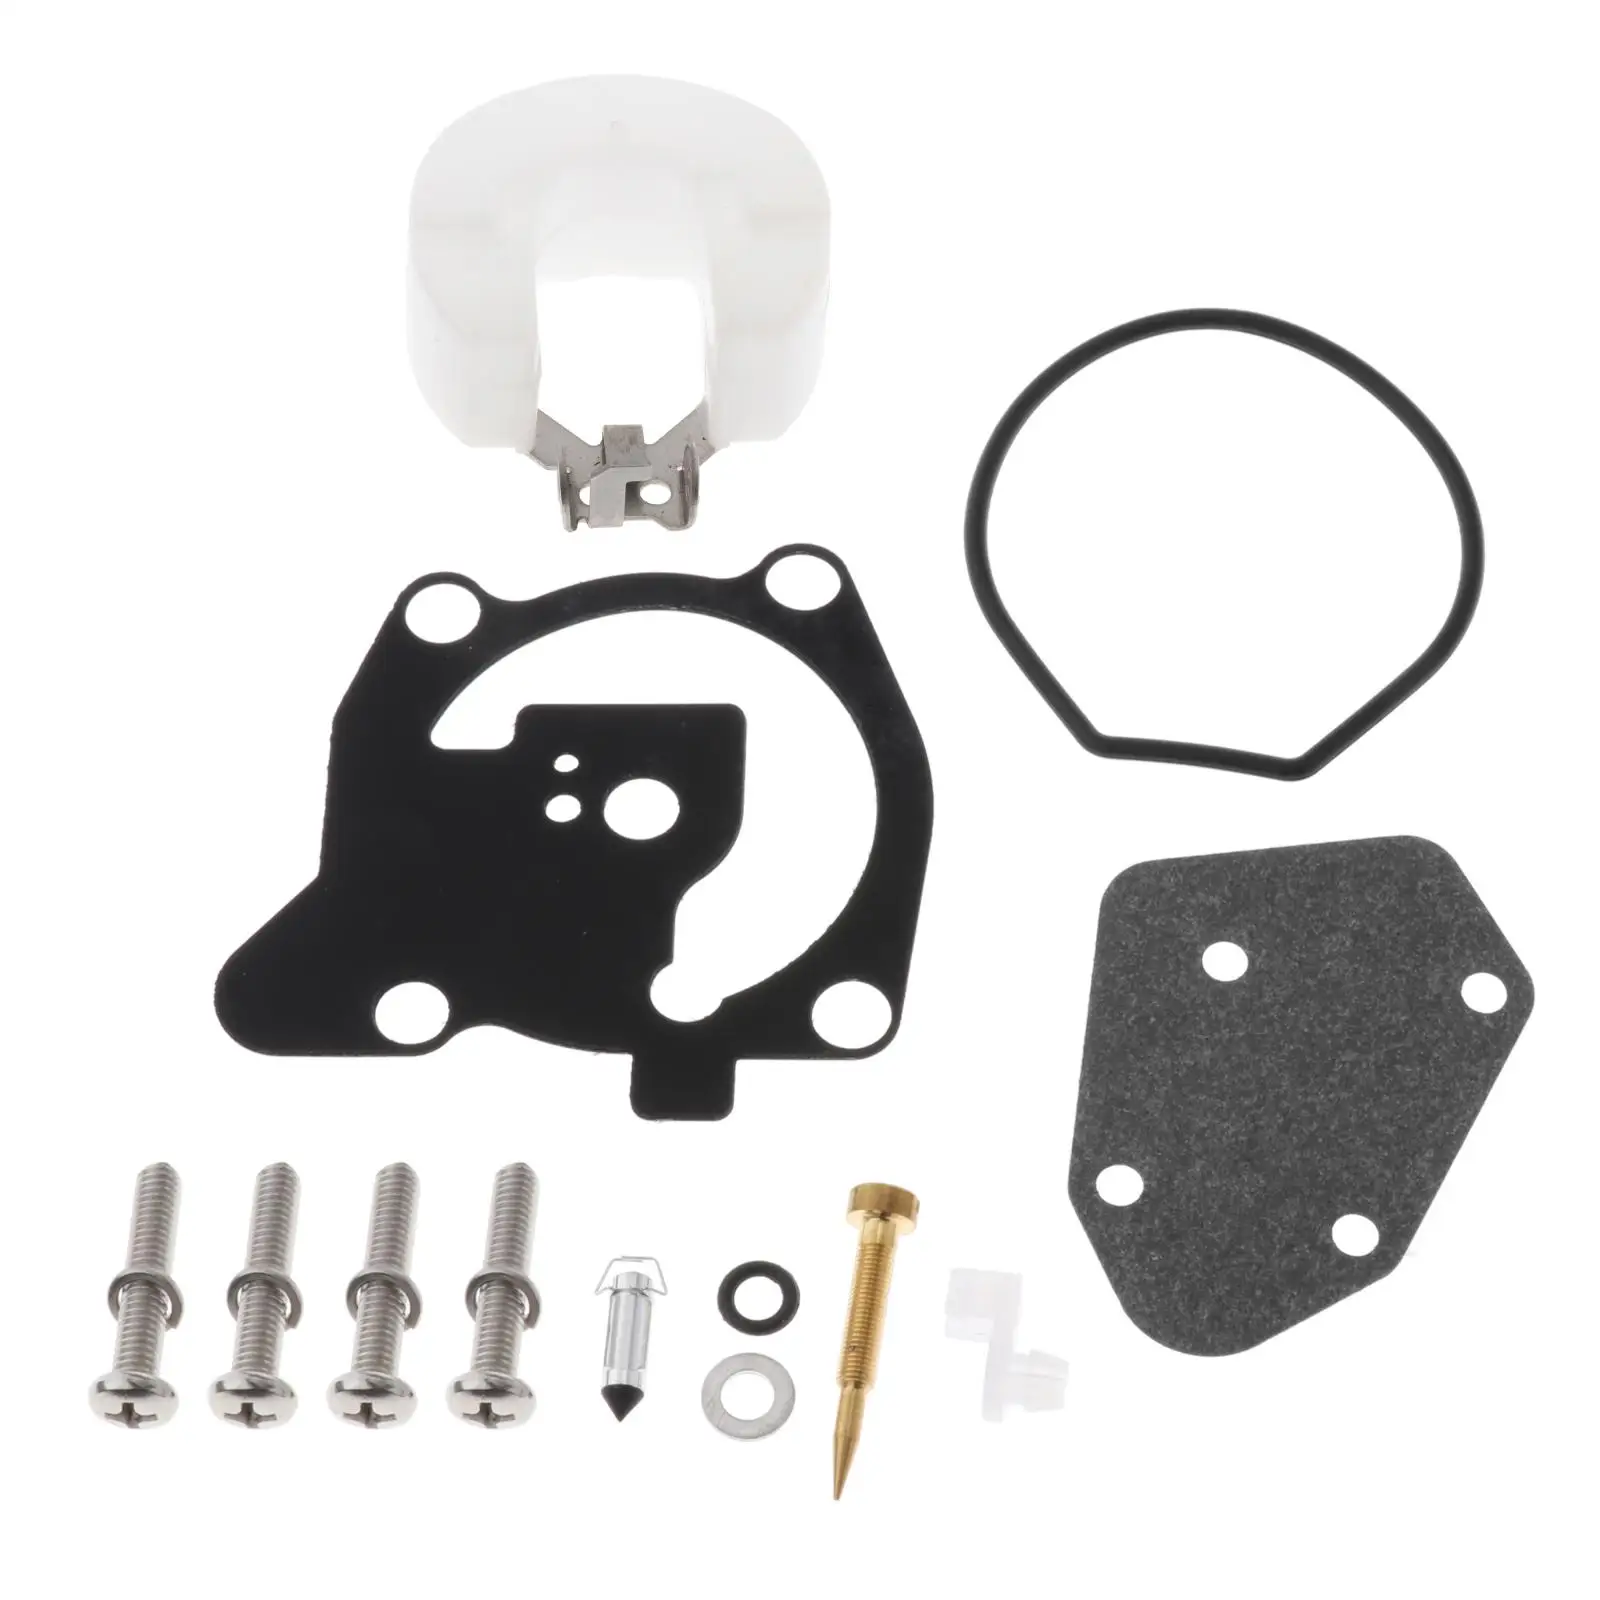 Boat Carburetor Carb Repair Kit Set 66T-W0093-00-00 66TW00930000 for Yamaha Outboard 40HP engine X models E40X